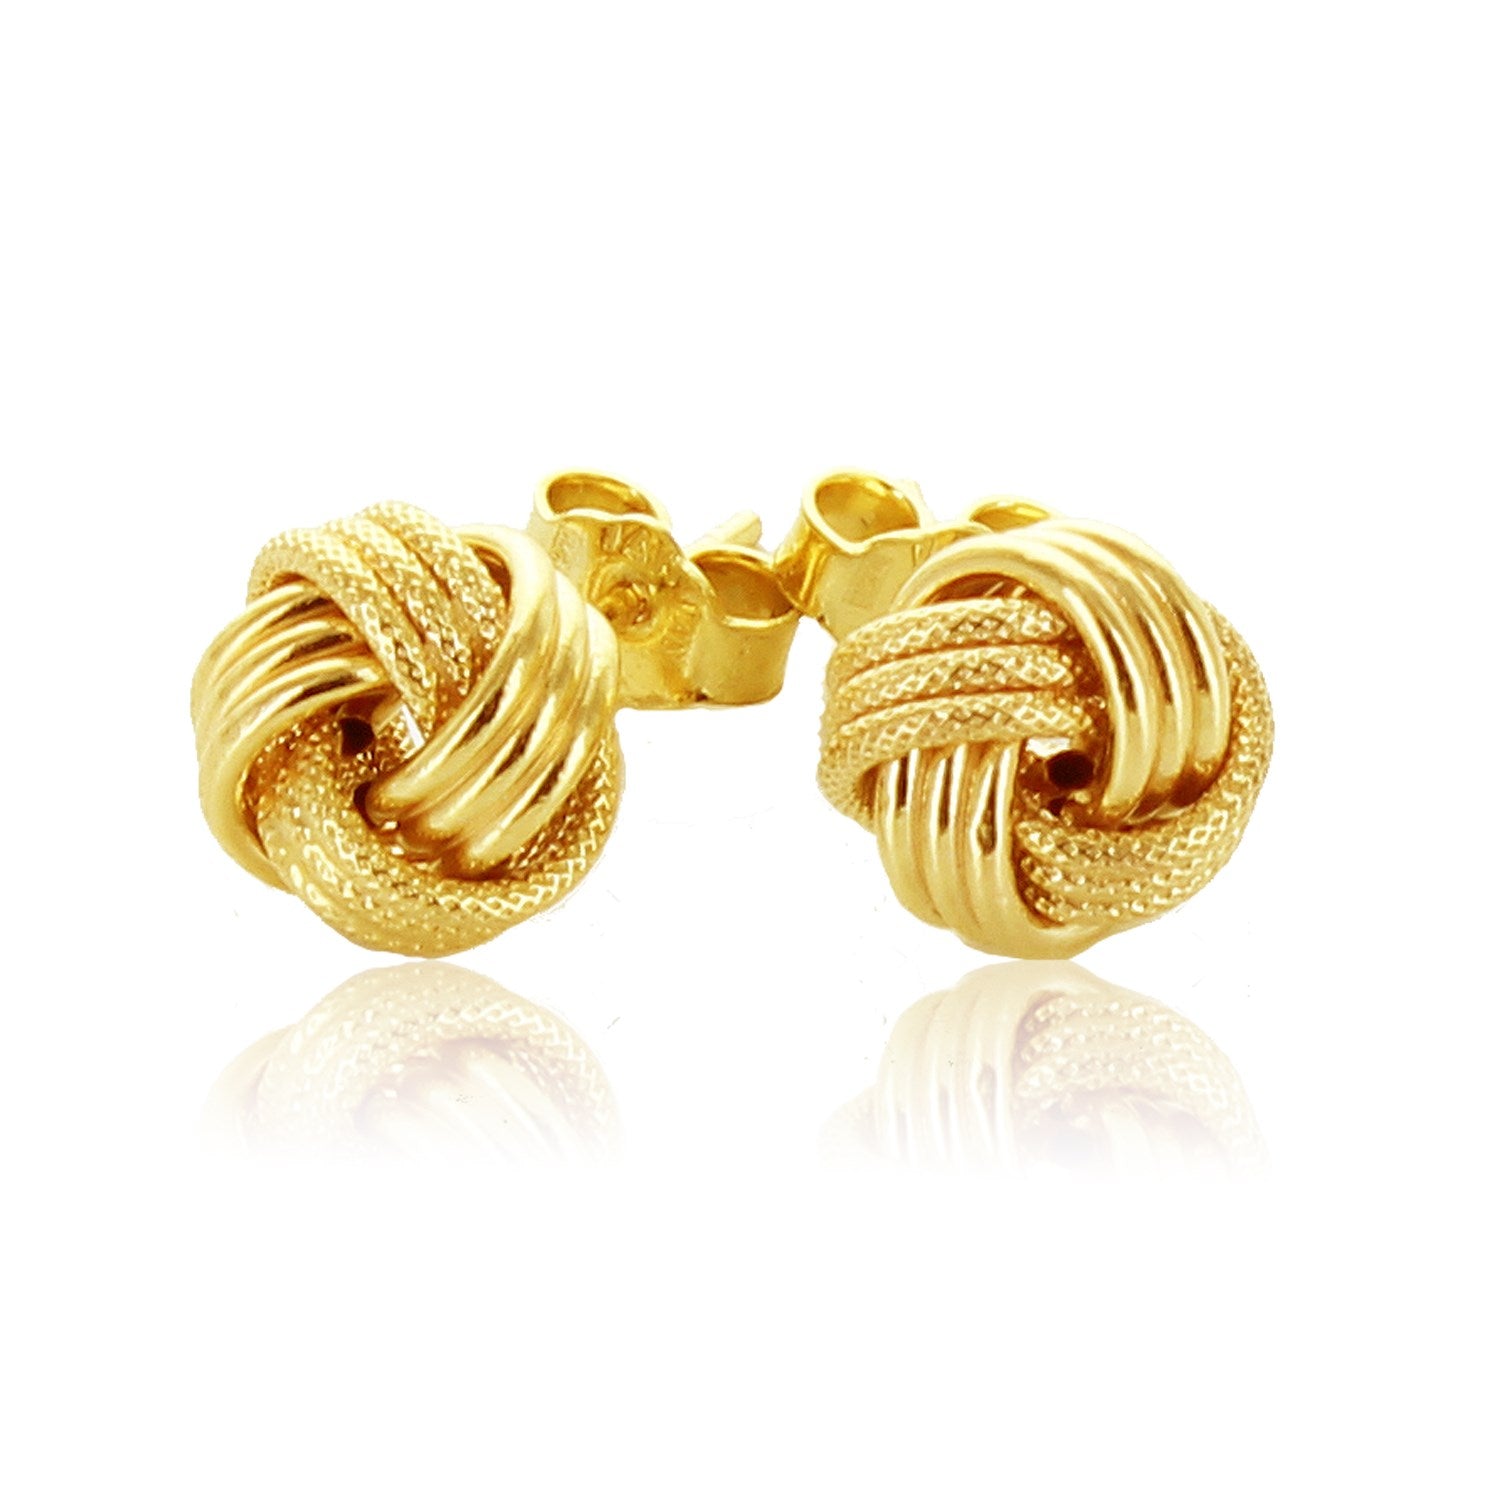 14k Yellow Gold Love Knot with Ridge Texture Earrings